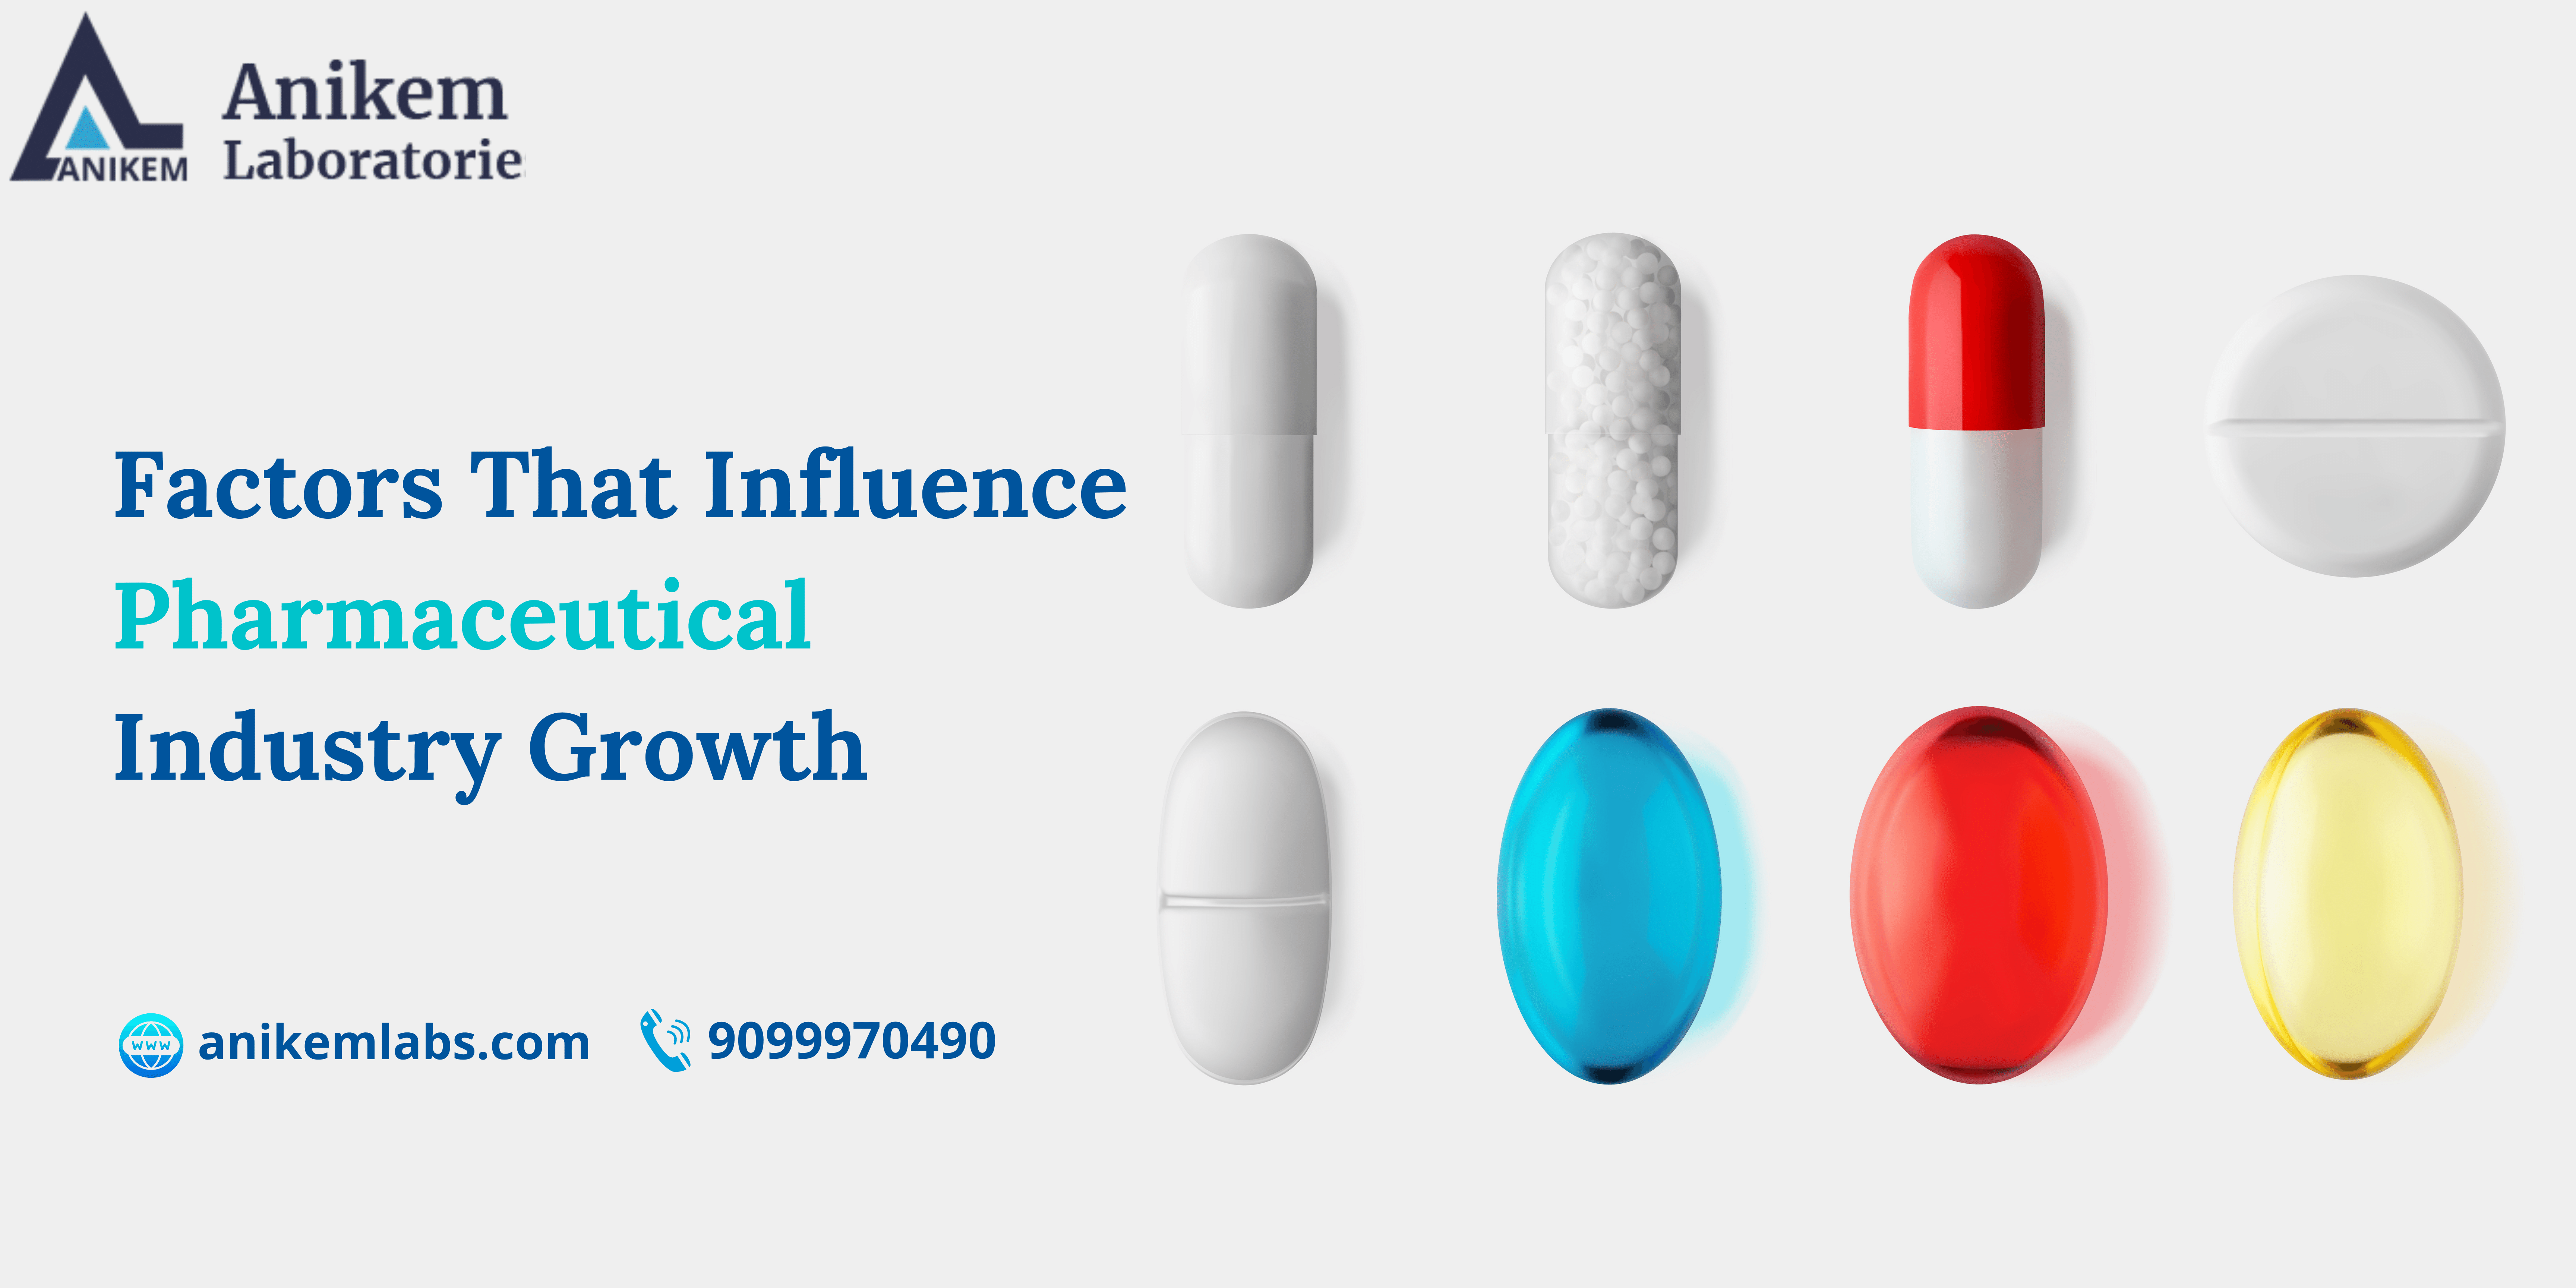 Factors That Influence Pharmaceutical Industry Growth